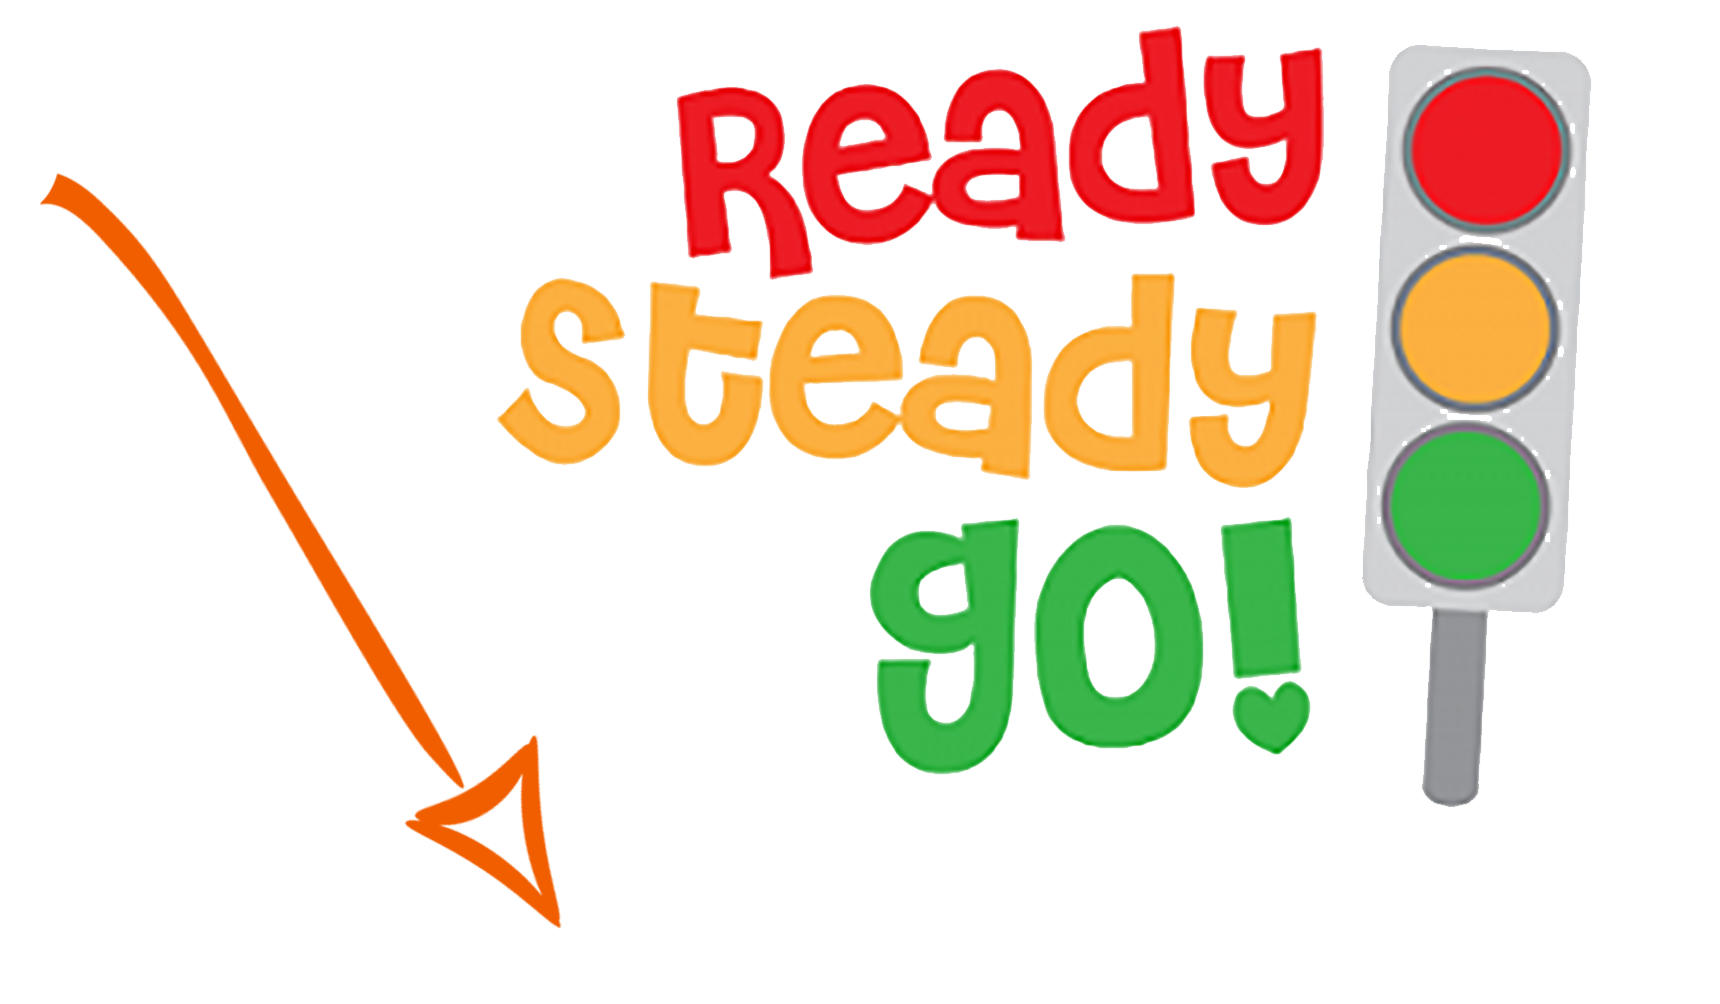 Ready, steady, go!. Ready steady go картинки. Get ready. Ready picture. Ready готово